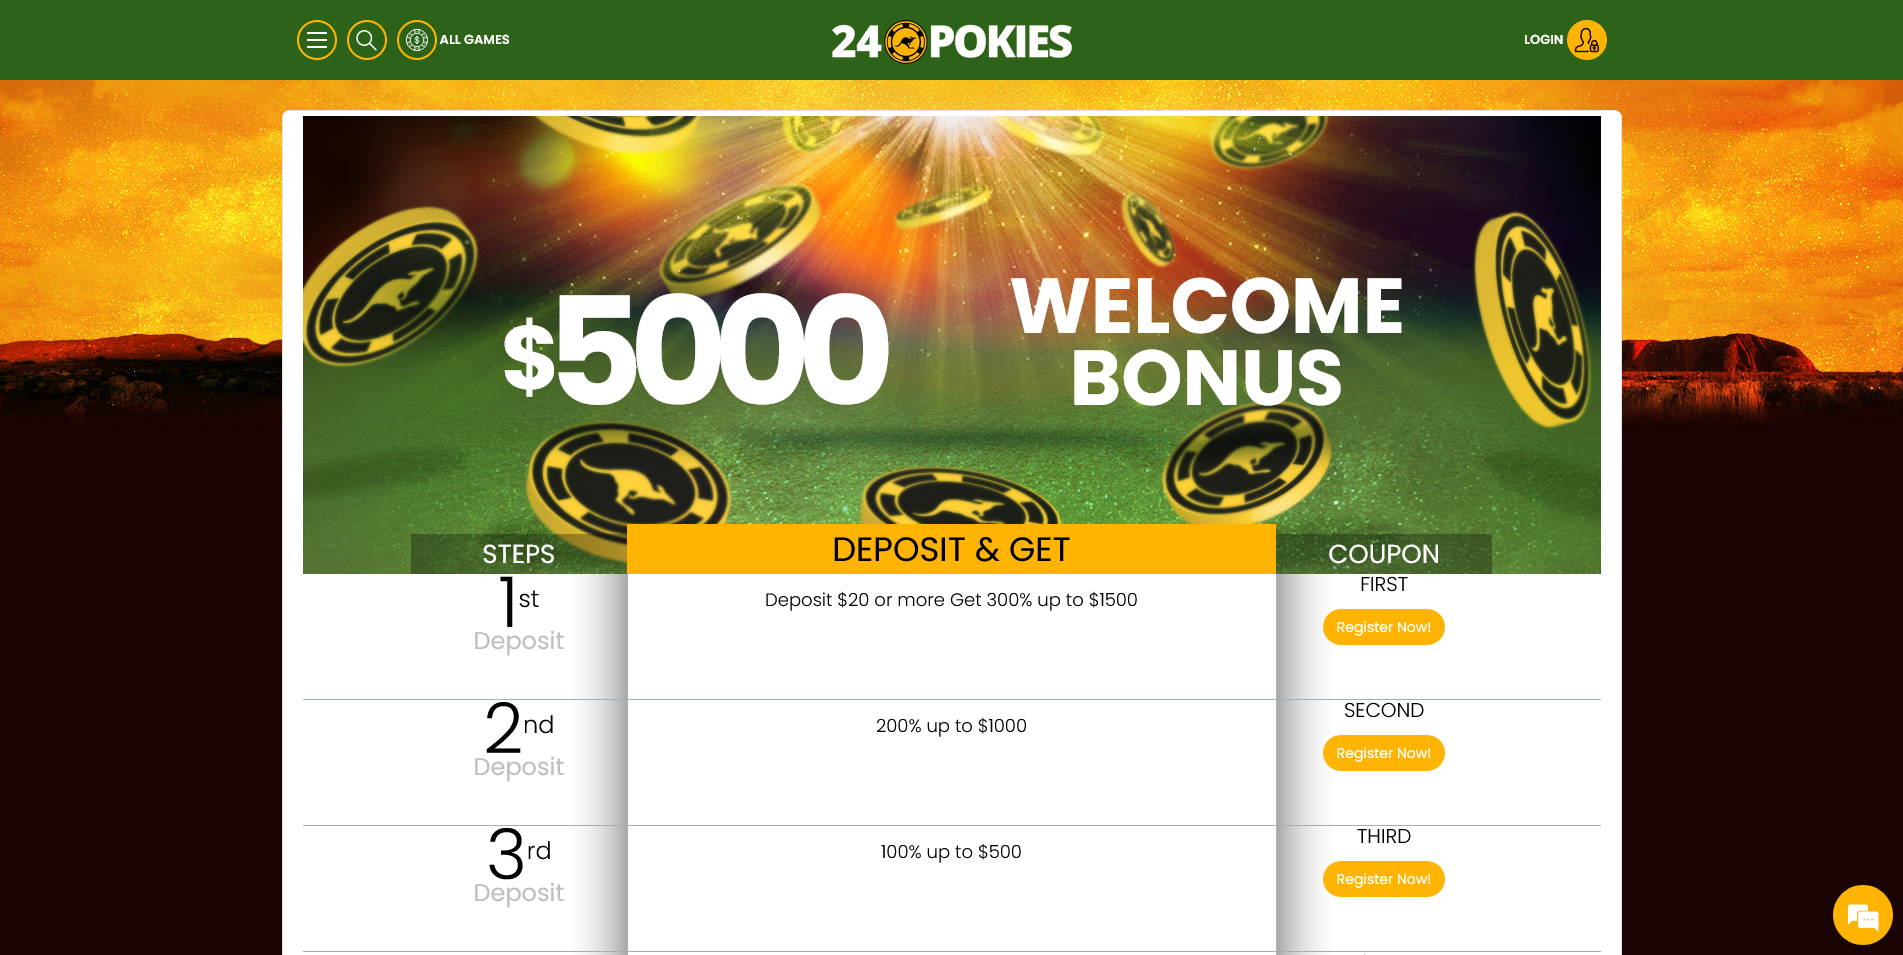 Screenshot of Promotions and Bonuses page on 24 Pokies Casino site